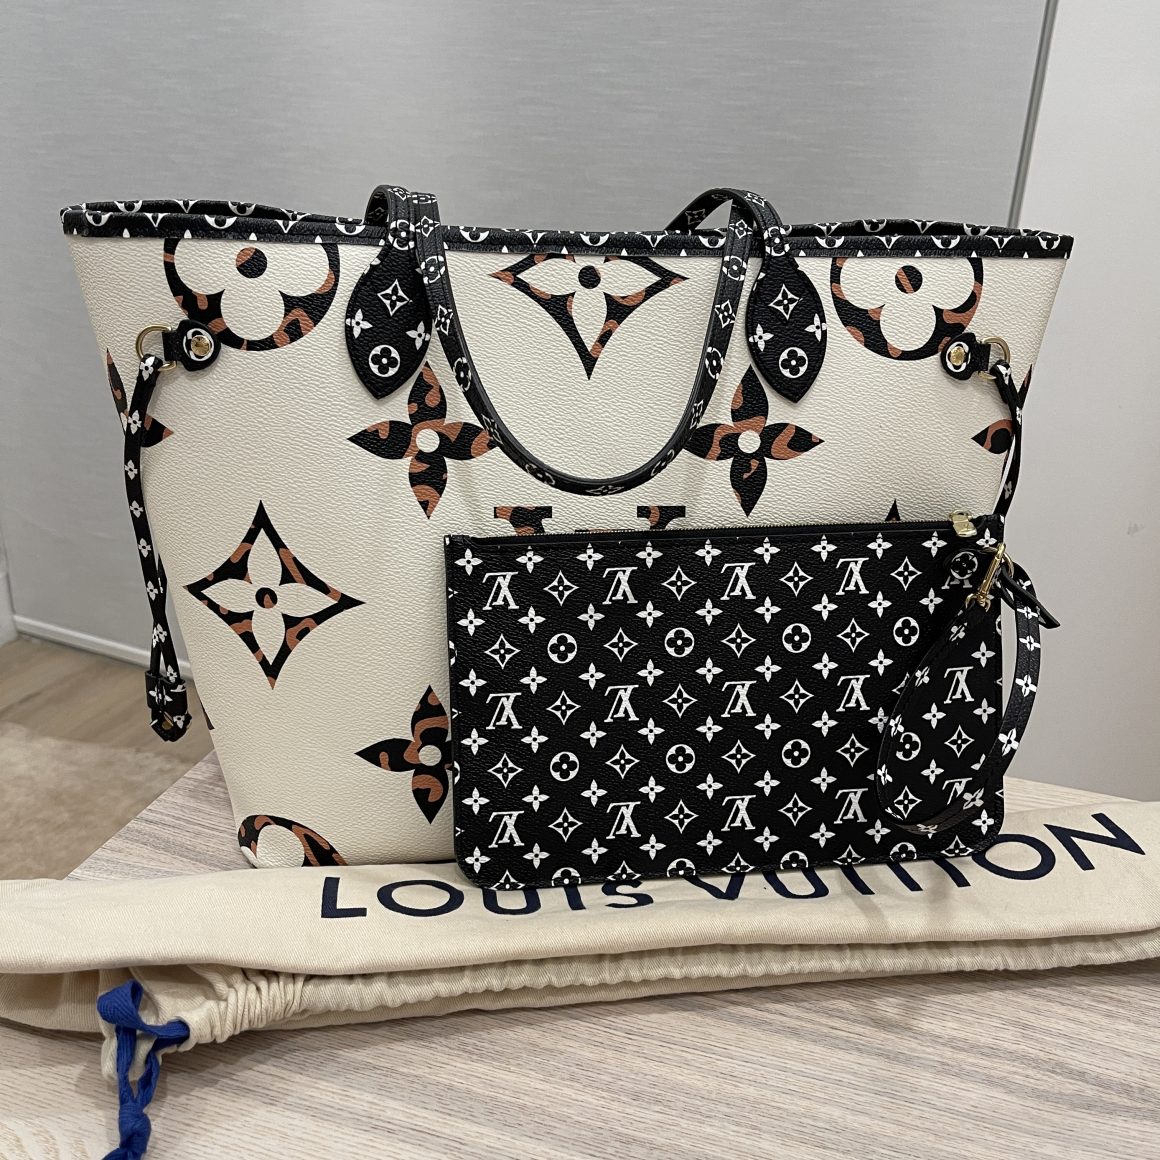 Louis Vuitton Neverfull Mm Giant Jungle Ivorie Tote